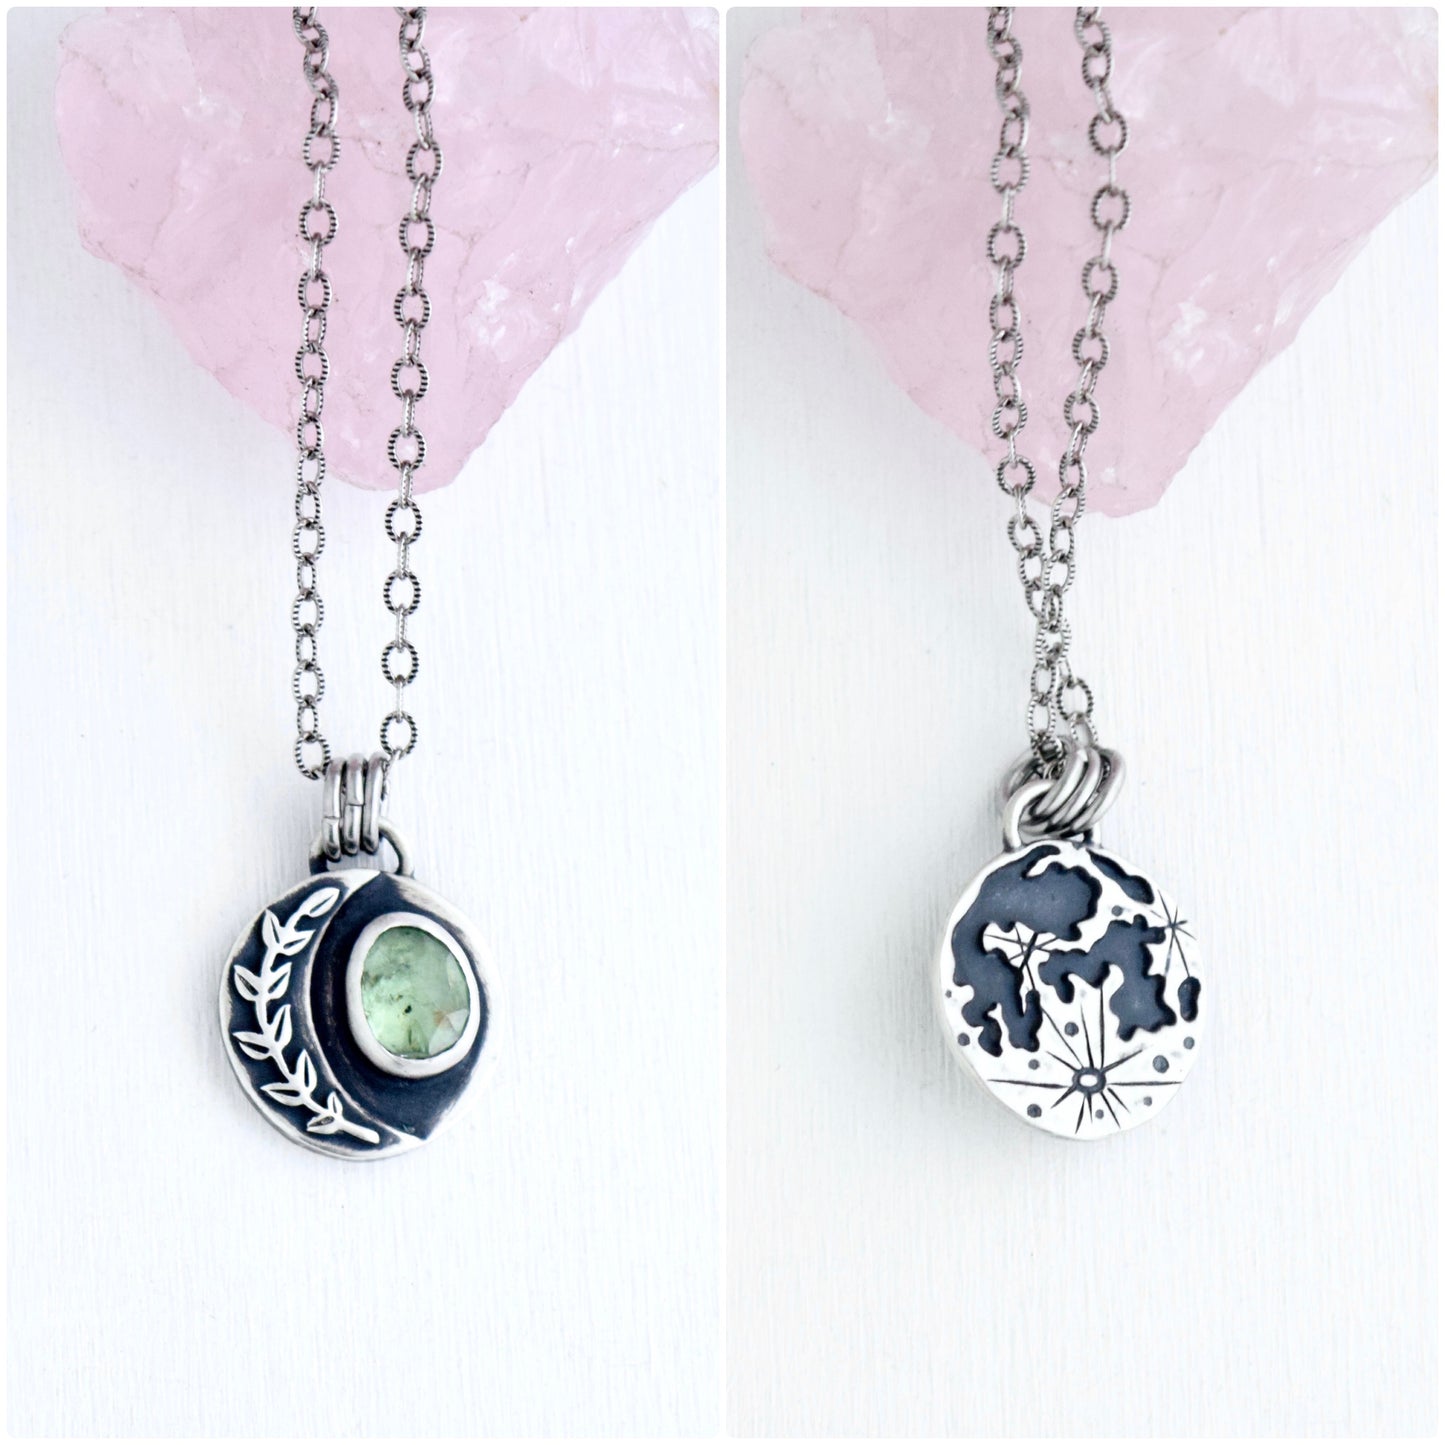 Double Sided Vine Lunar Phase Pendant with Green Kyanite